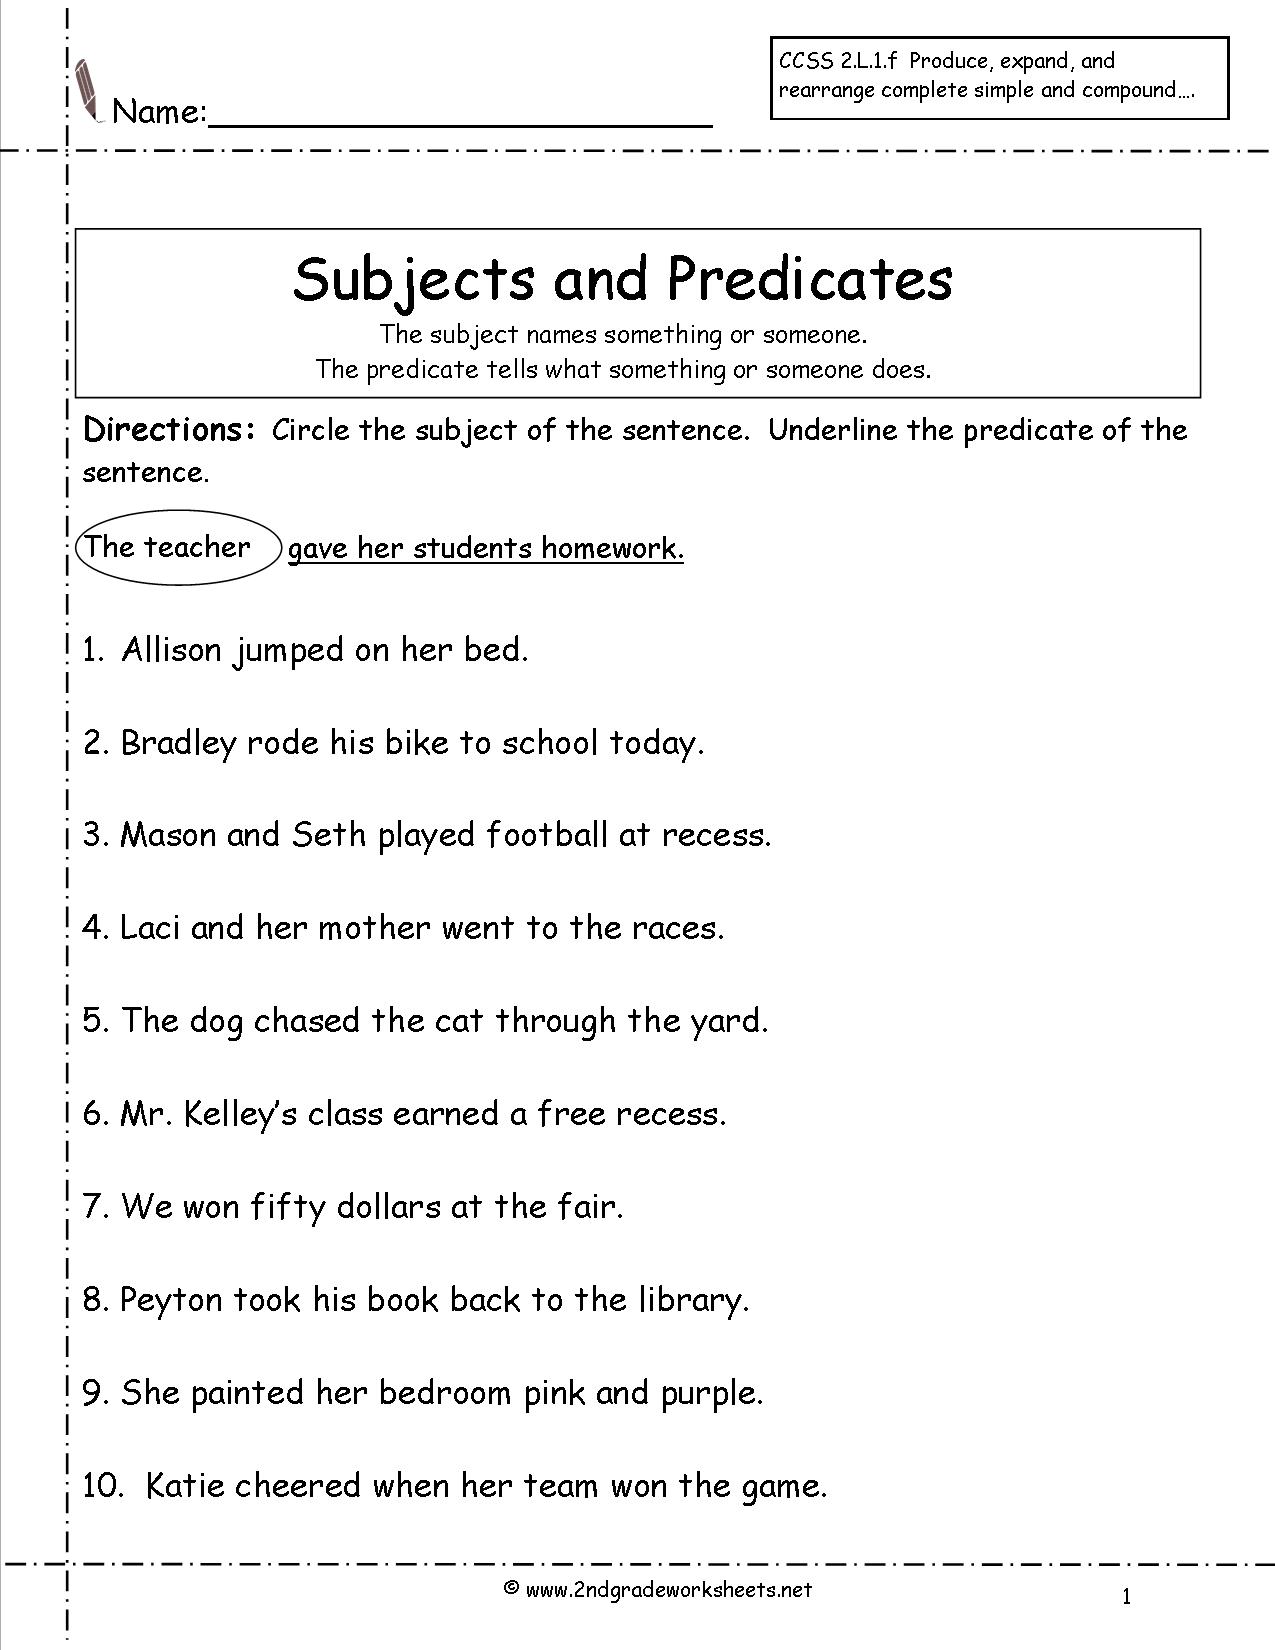 Subject and Predicate Worksheets Image